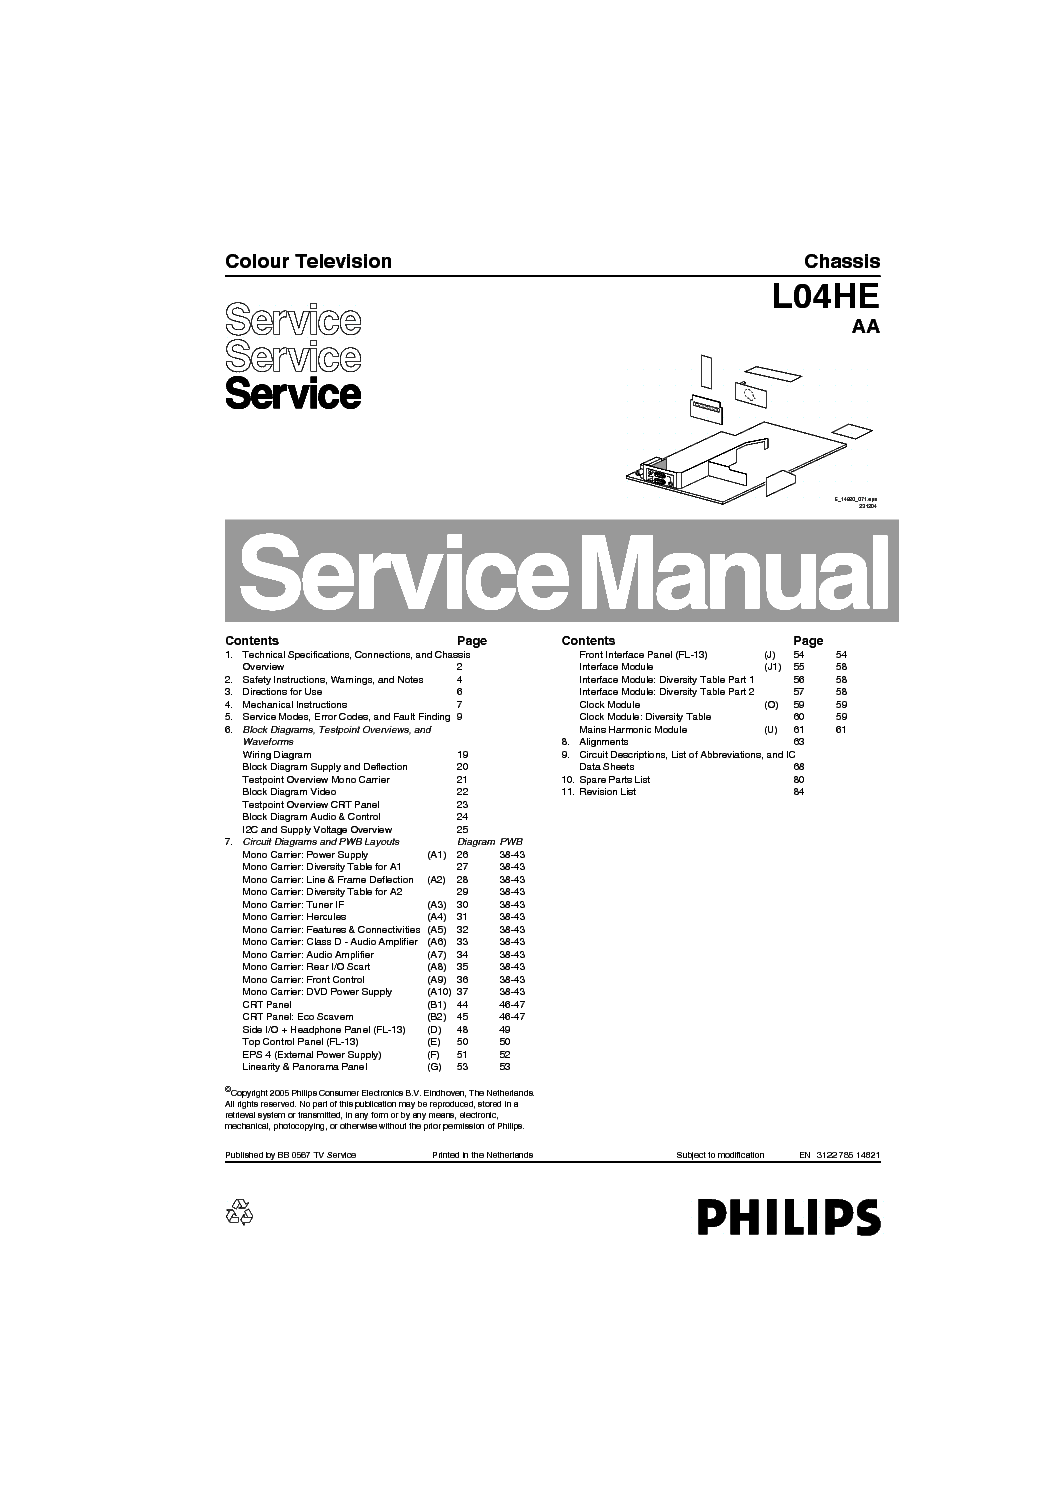 PHILIPS L04HE AA CHASSIS service manual (1st page)